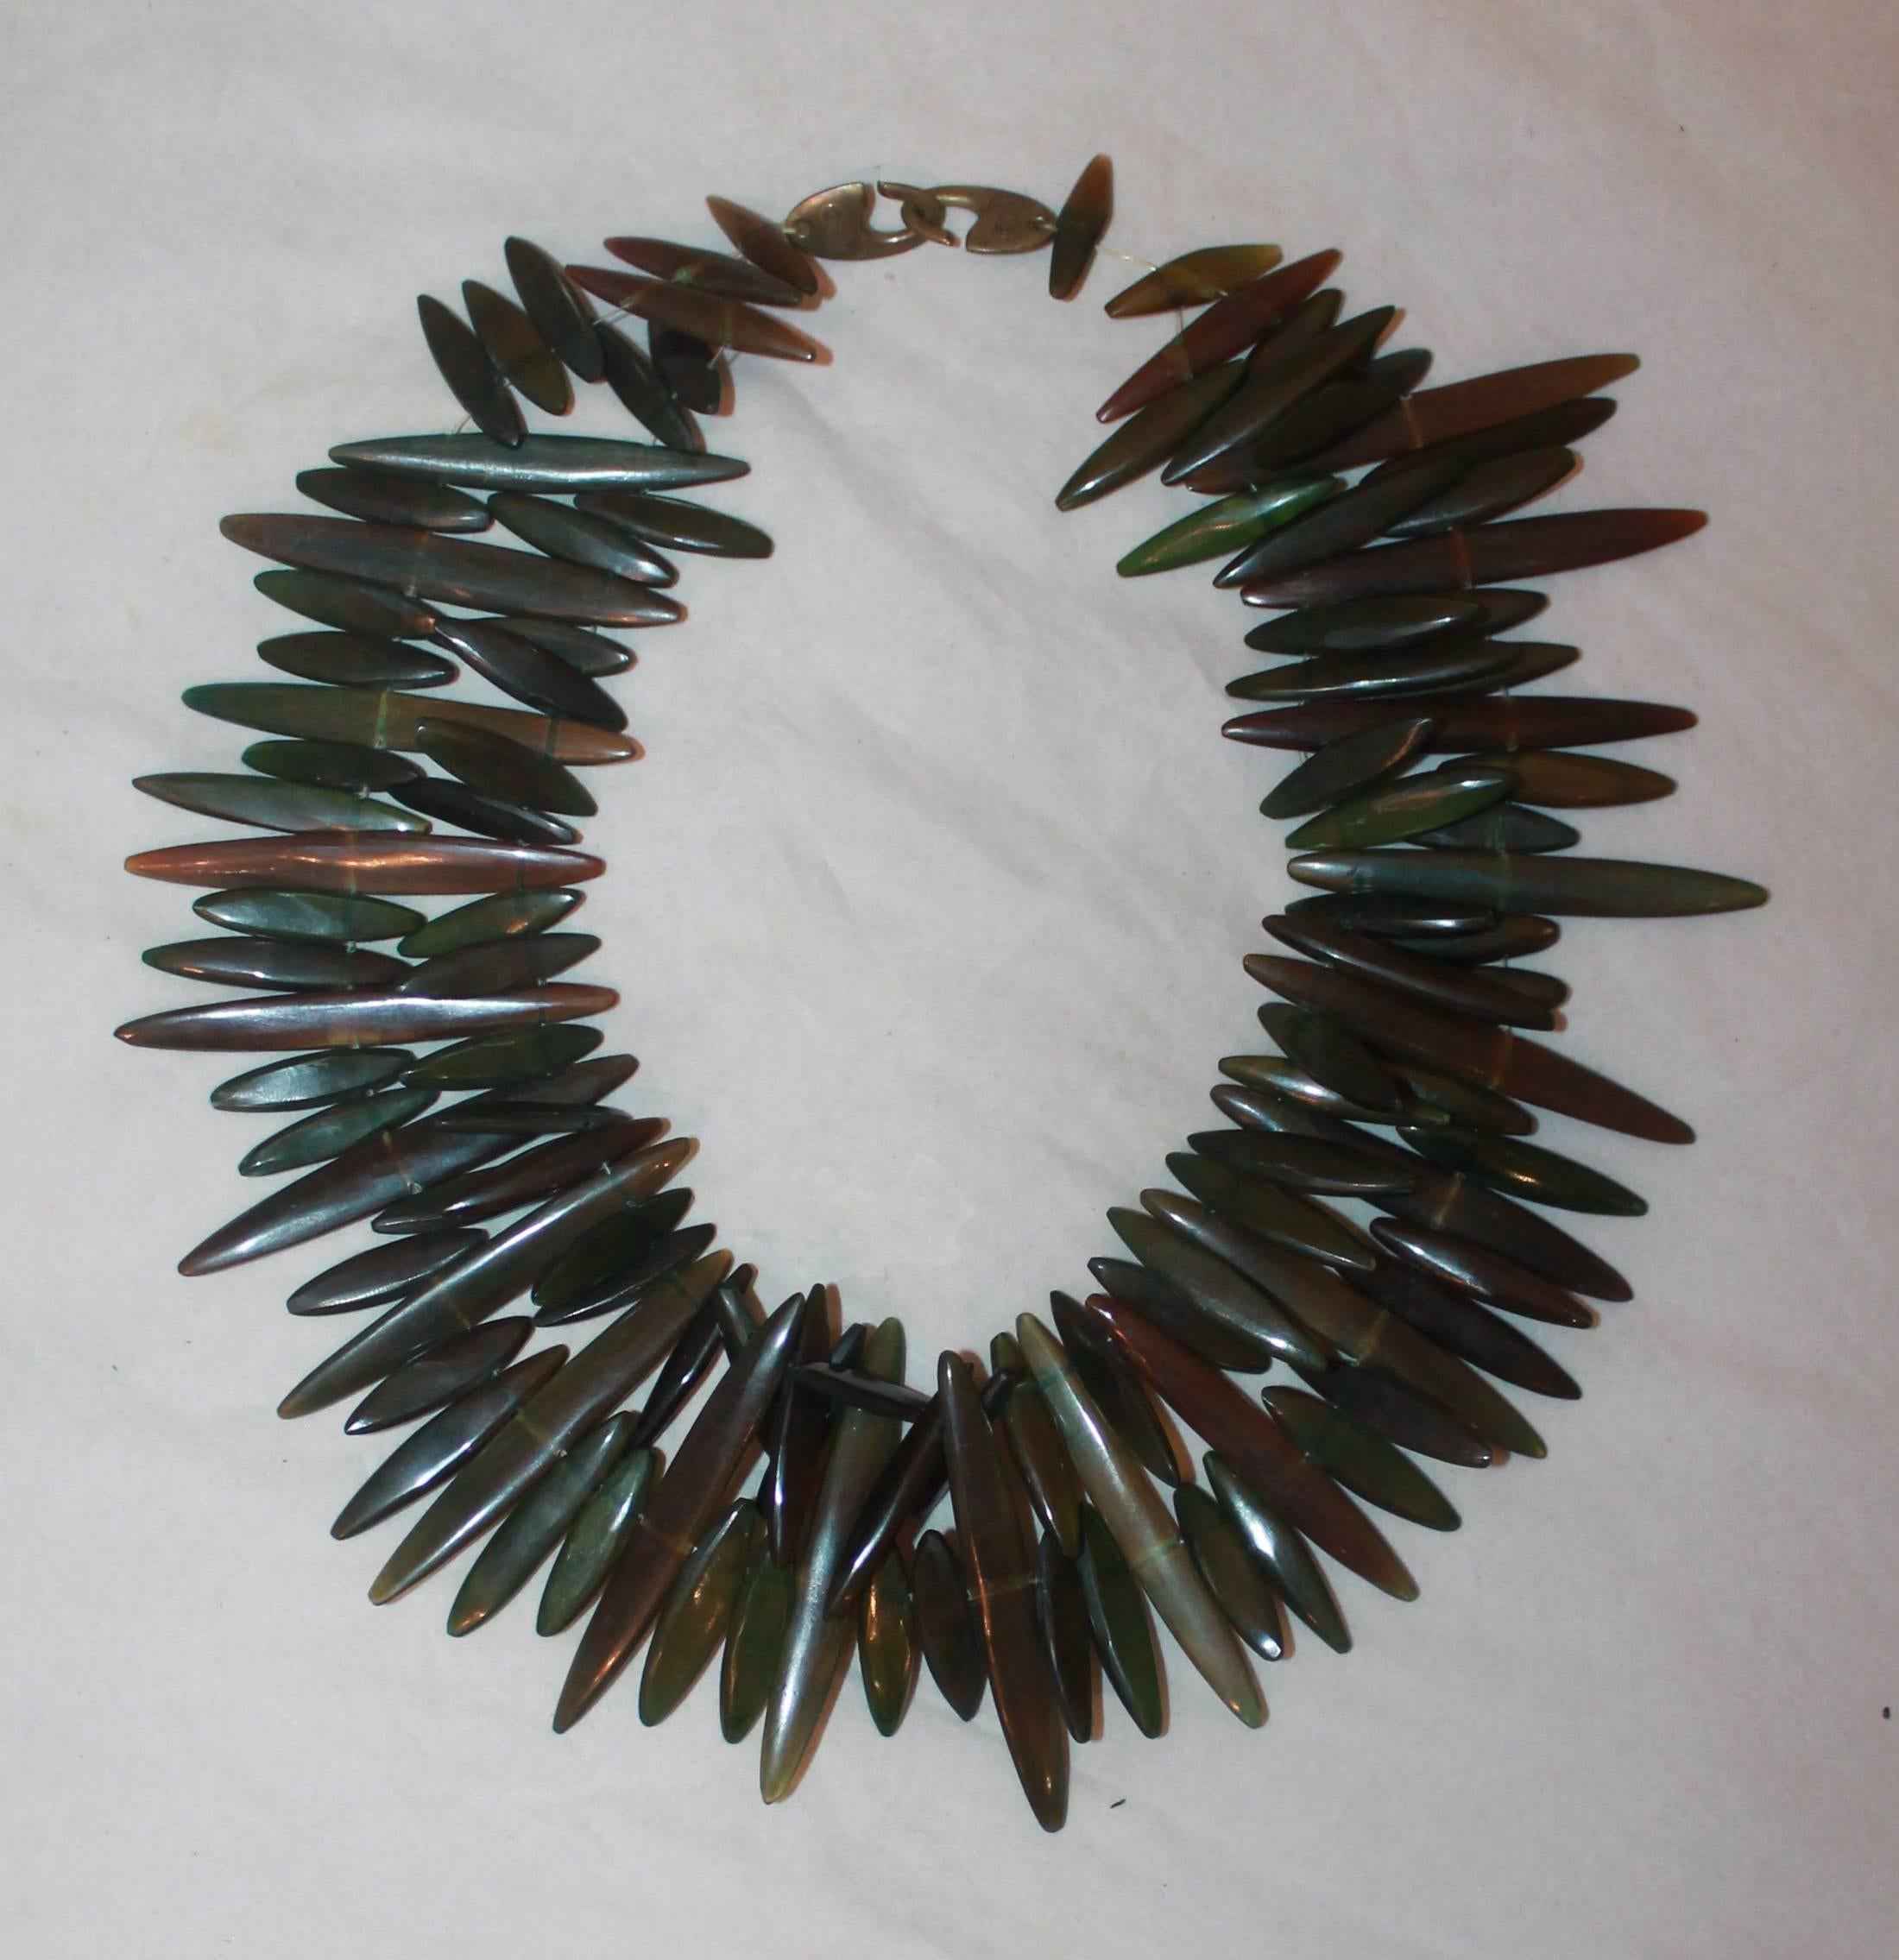 Gerda Lynggaard for Monies Vintage Forest Green Horn Necklace - circa 1986. This necklace is a very unique piece and is in excellent condition. The horn has shades of dark green and tan. 

Measurement: 
Length- 21.5